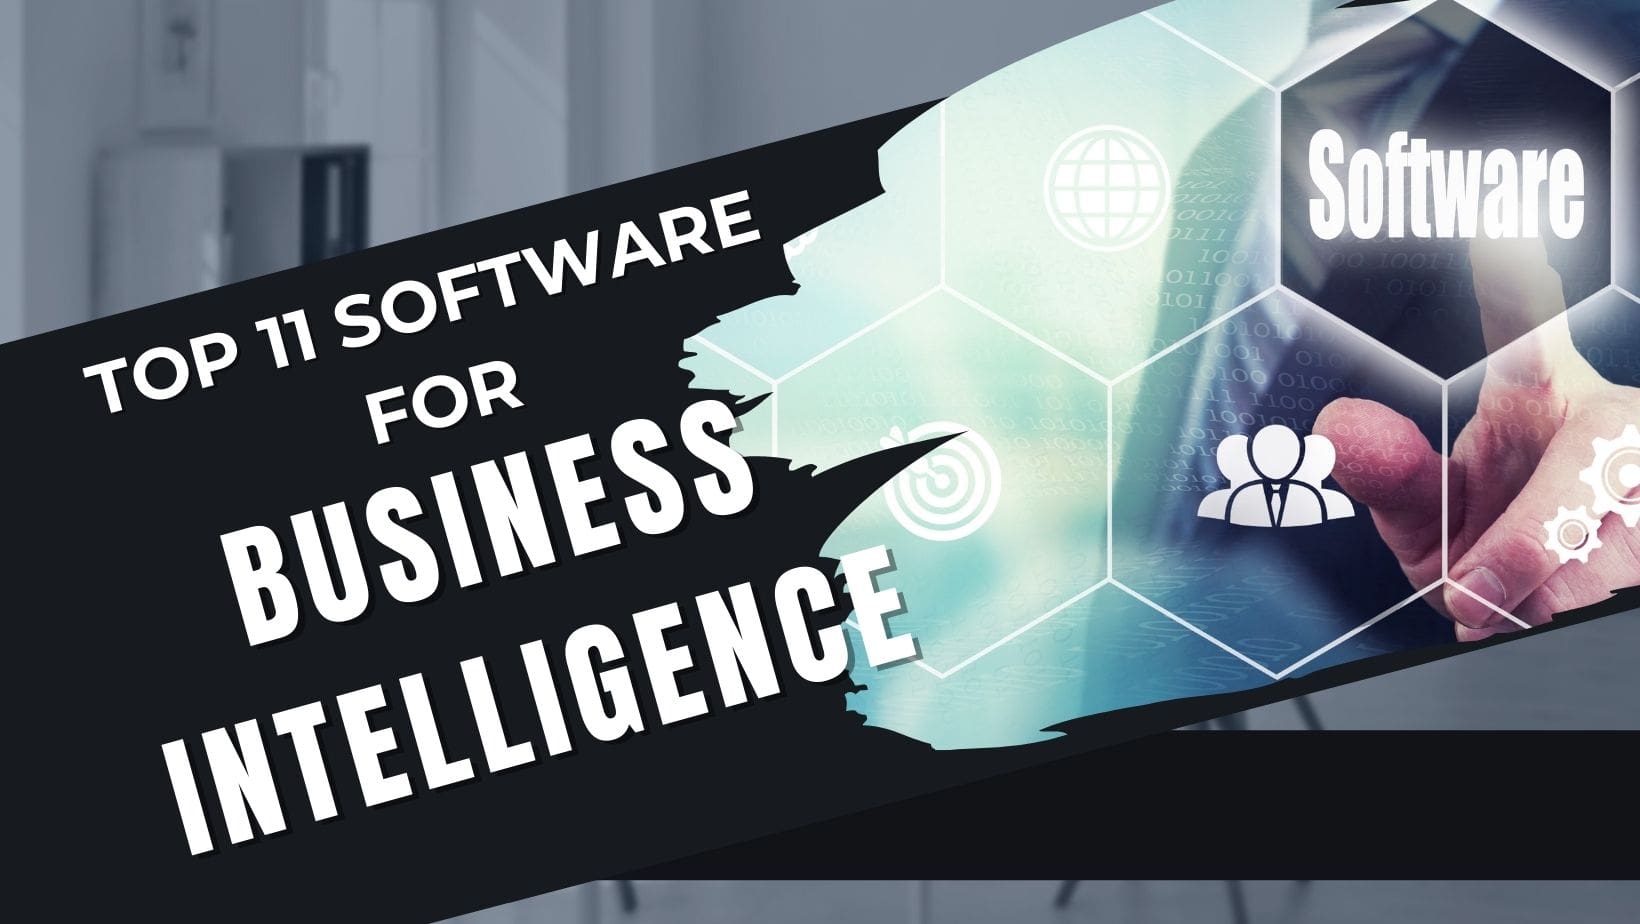 Top 11 software for business intelligence-min